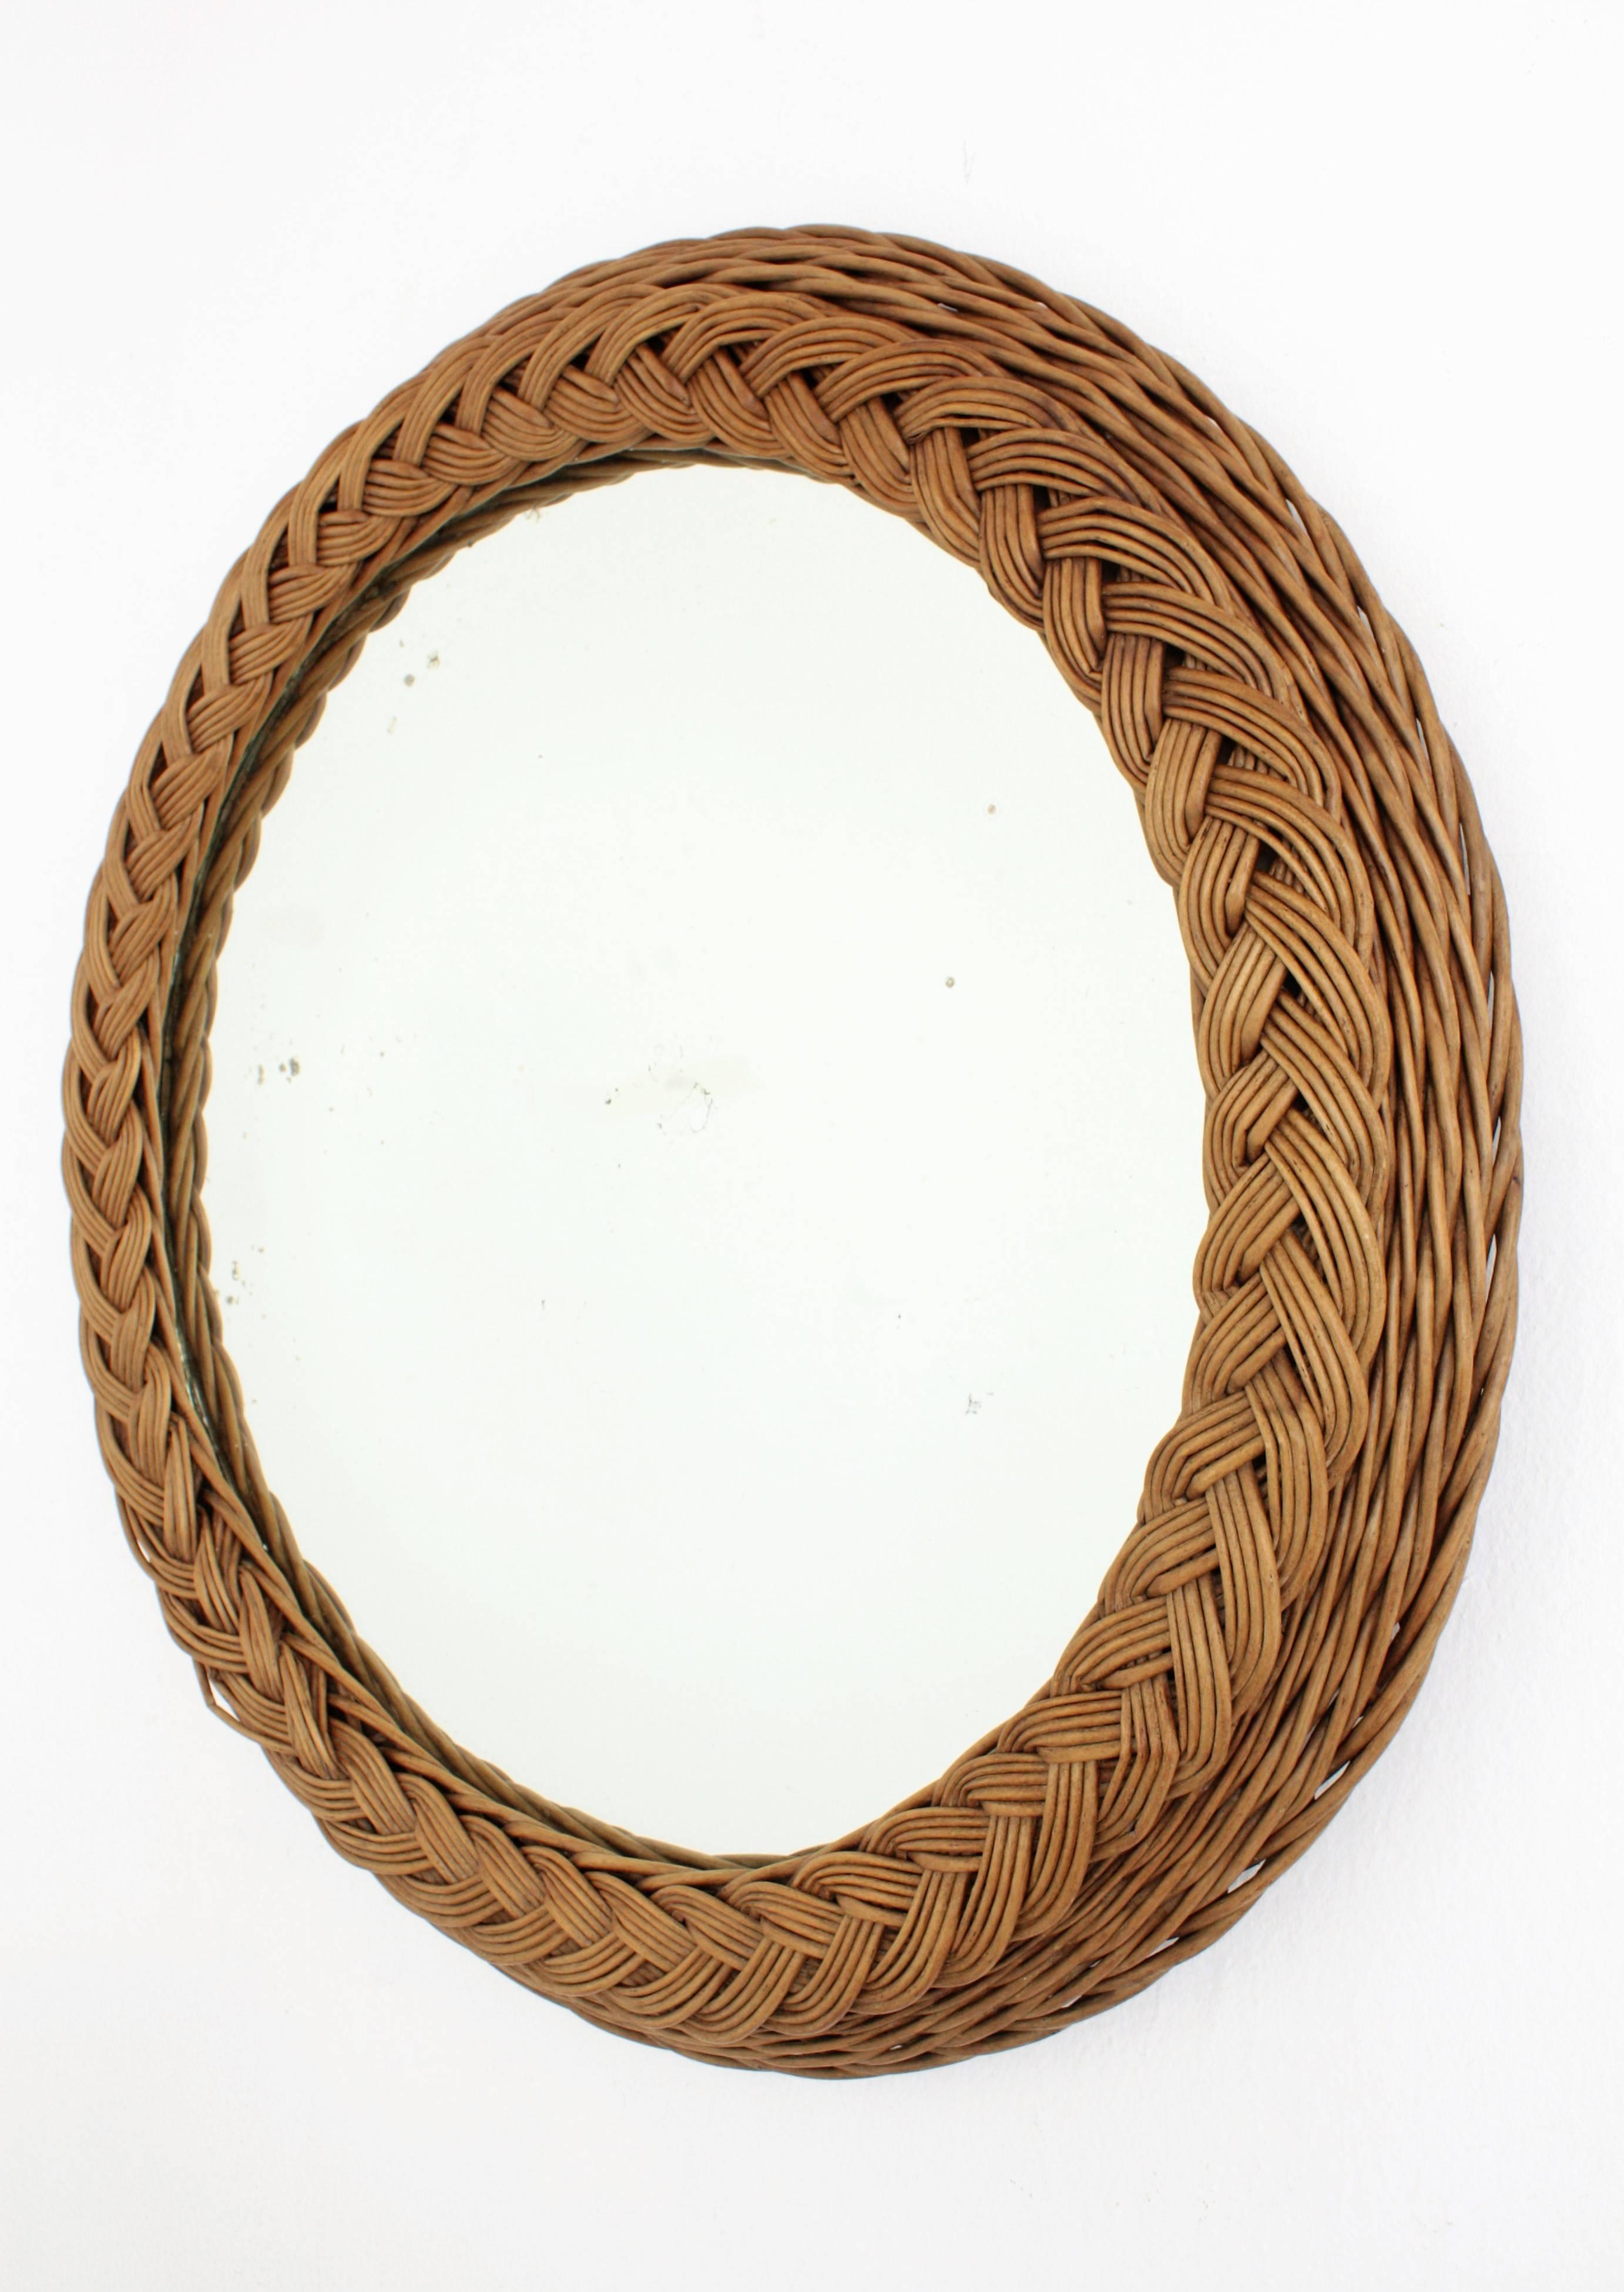 A beautiful large size handwoven wicker mirror with a braided frame . Unusual in this size. Handcrafted in Spain, circa 1940s.
Lovely to place alone but also interesting to create a wall composition with other wicker, rattan or bamboo